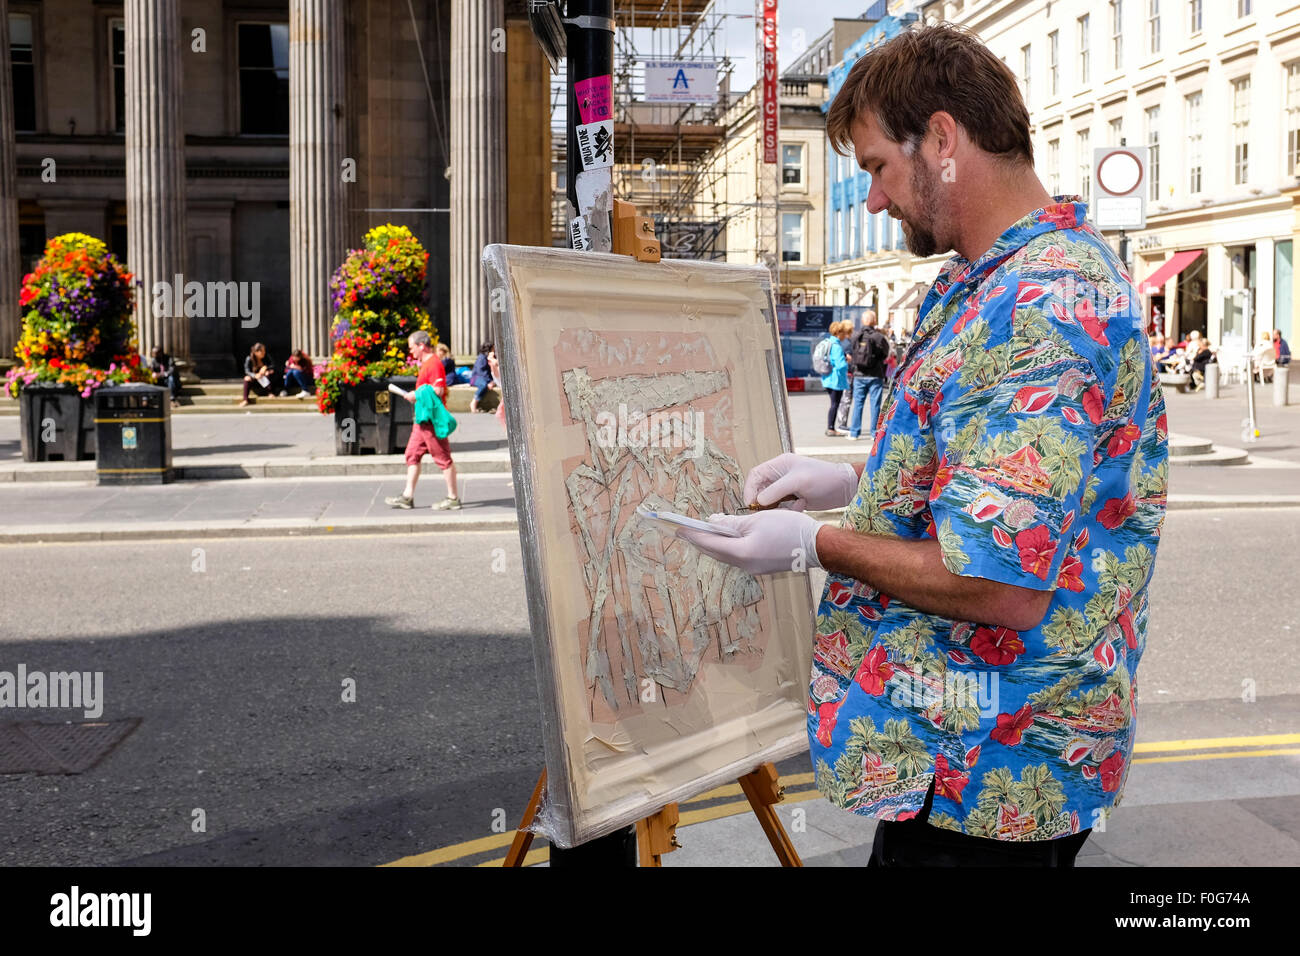 Glasgow, Scotland, UK. 15th Aug, 2015. Almost 150 artists came to Glasgow to take part in the "Rapid Painter" art competition with the aim being to make a painting capturing the spirit of Glasgow city, completed in 1 day. The artists attracted a lot of curiosity and interest from tourists and locals, when they set up in various locations about the city. All the completed works will go on exhibition on Sunday 16 August at the Royal Concert Hall, Sauchiehall Street, Glasgow when many of the paintings will be for sale. Credit:  Findlay/Alamy Live News Stock Photo